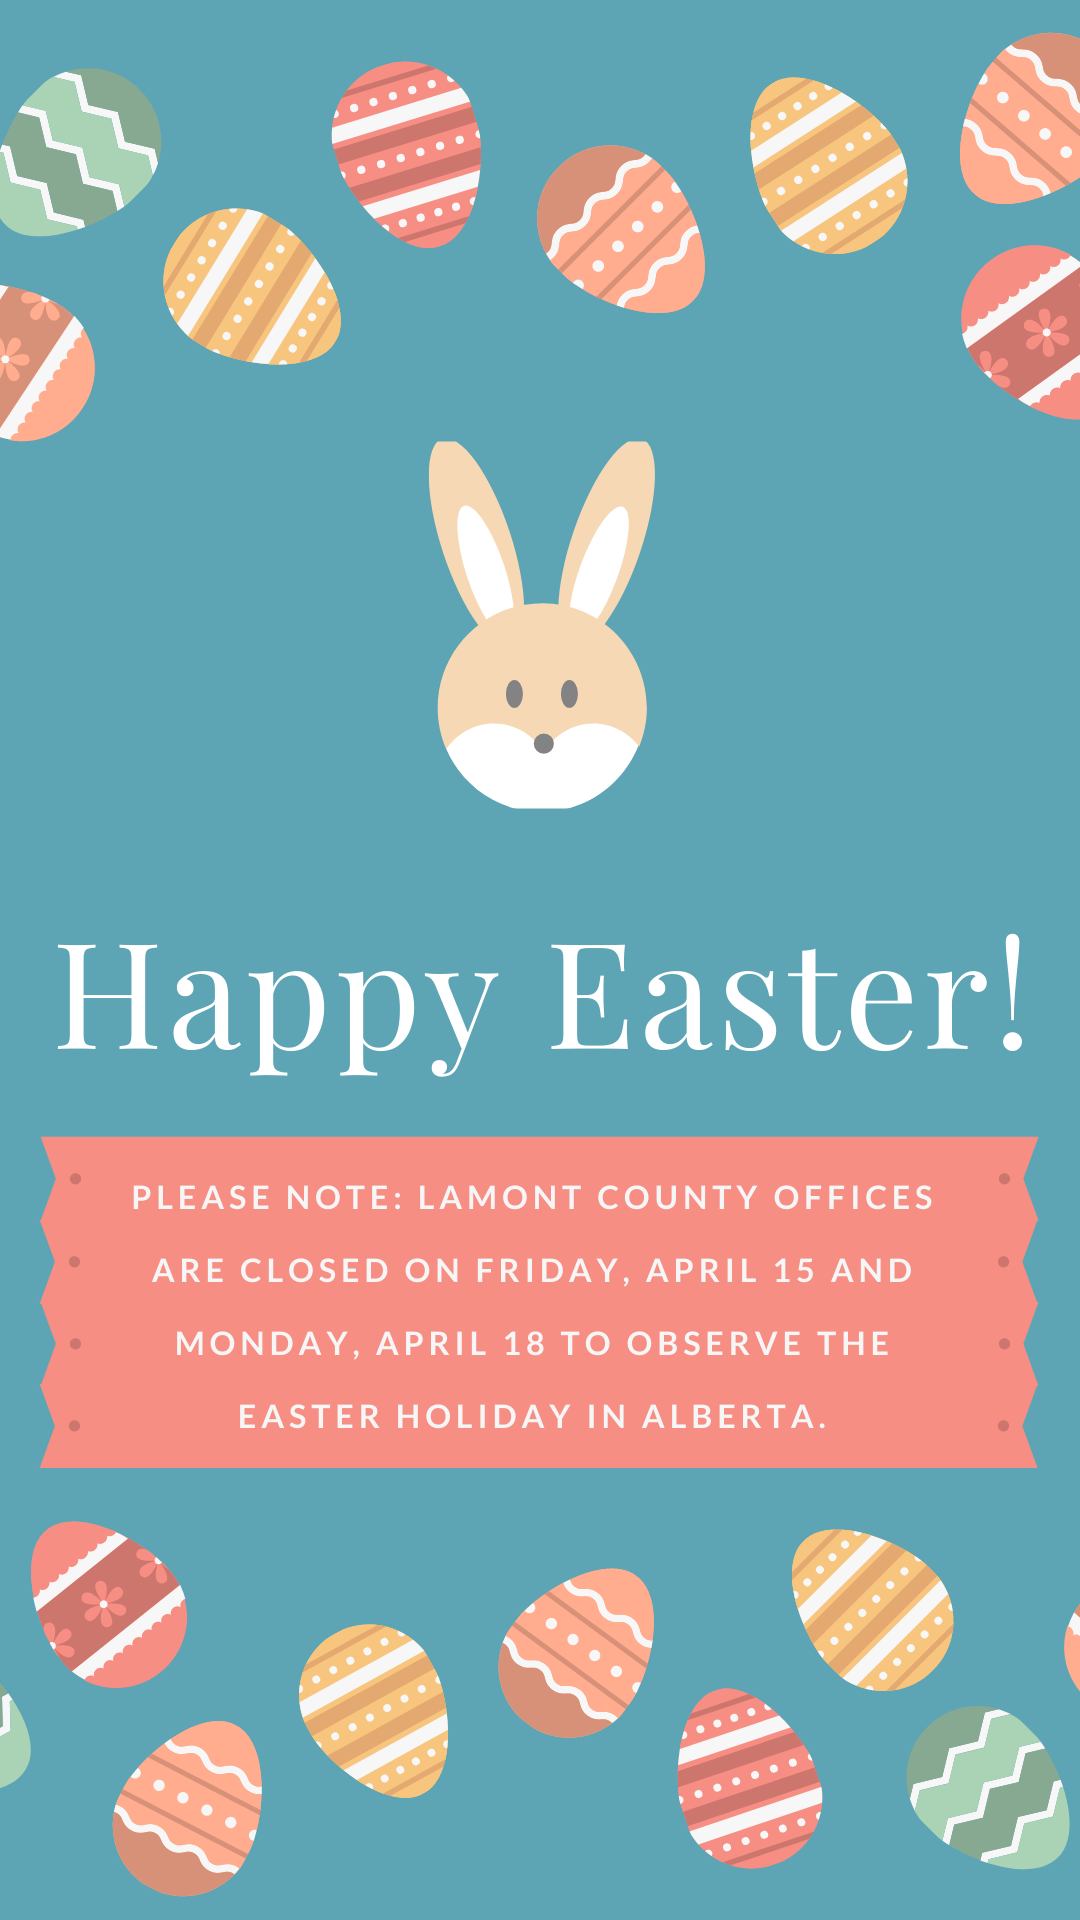 lamont-county-offices-closed-for-easter-april-15-and-18-news